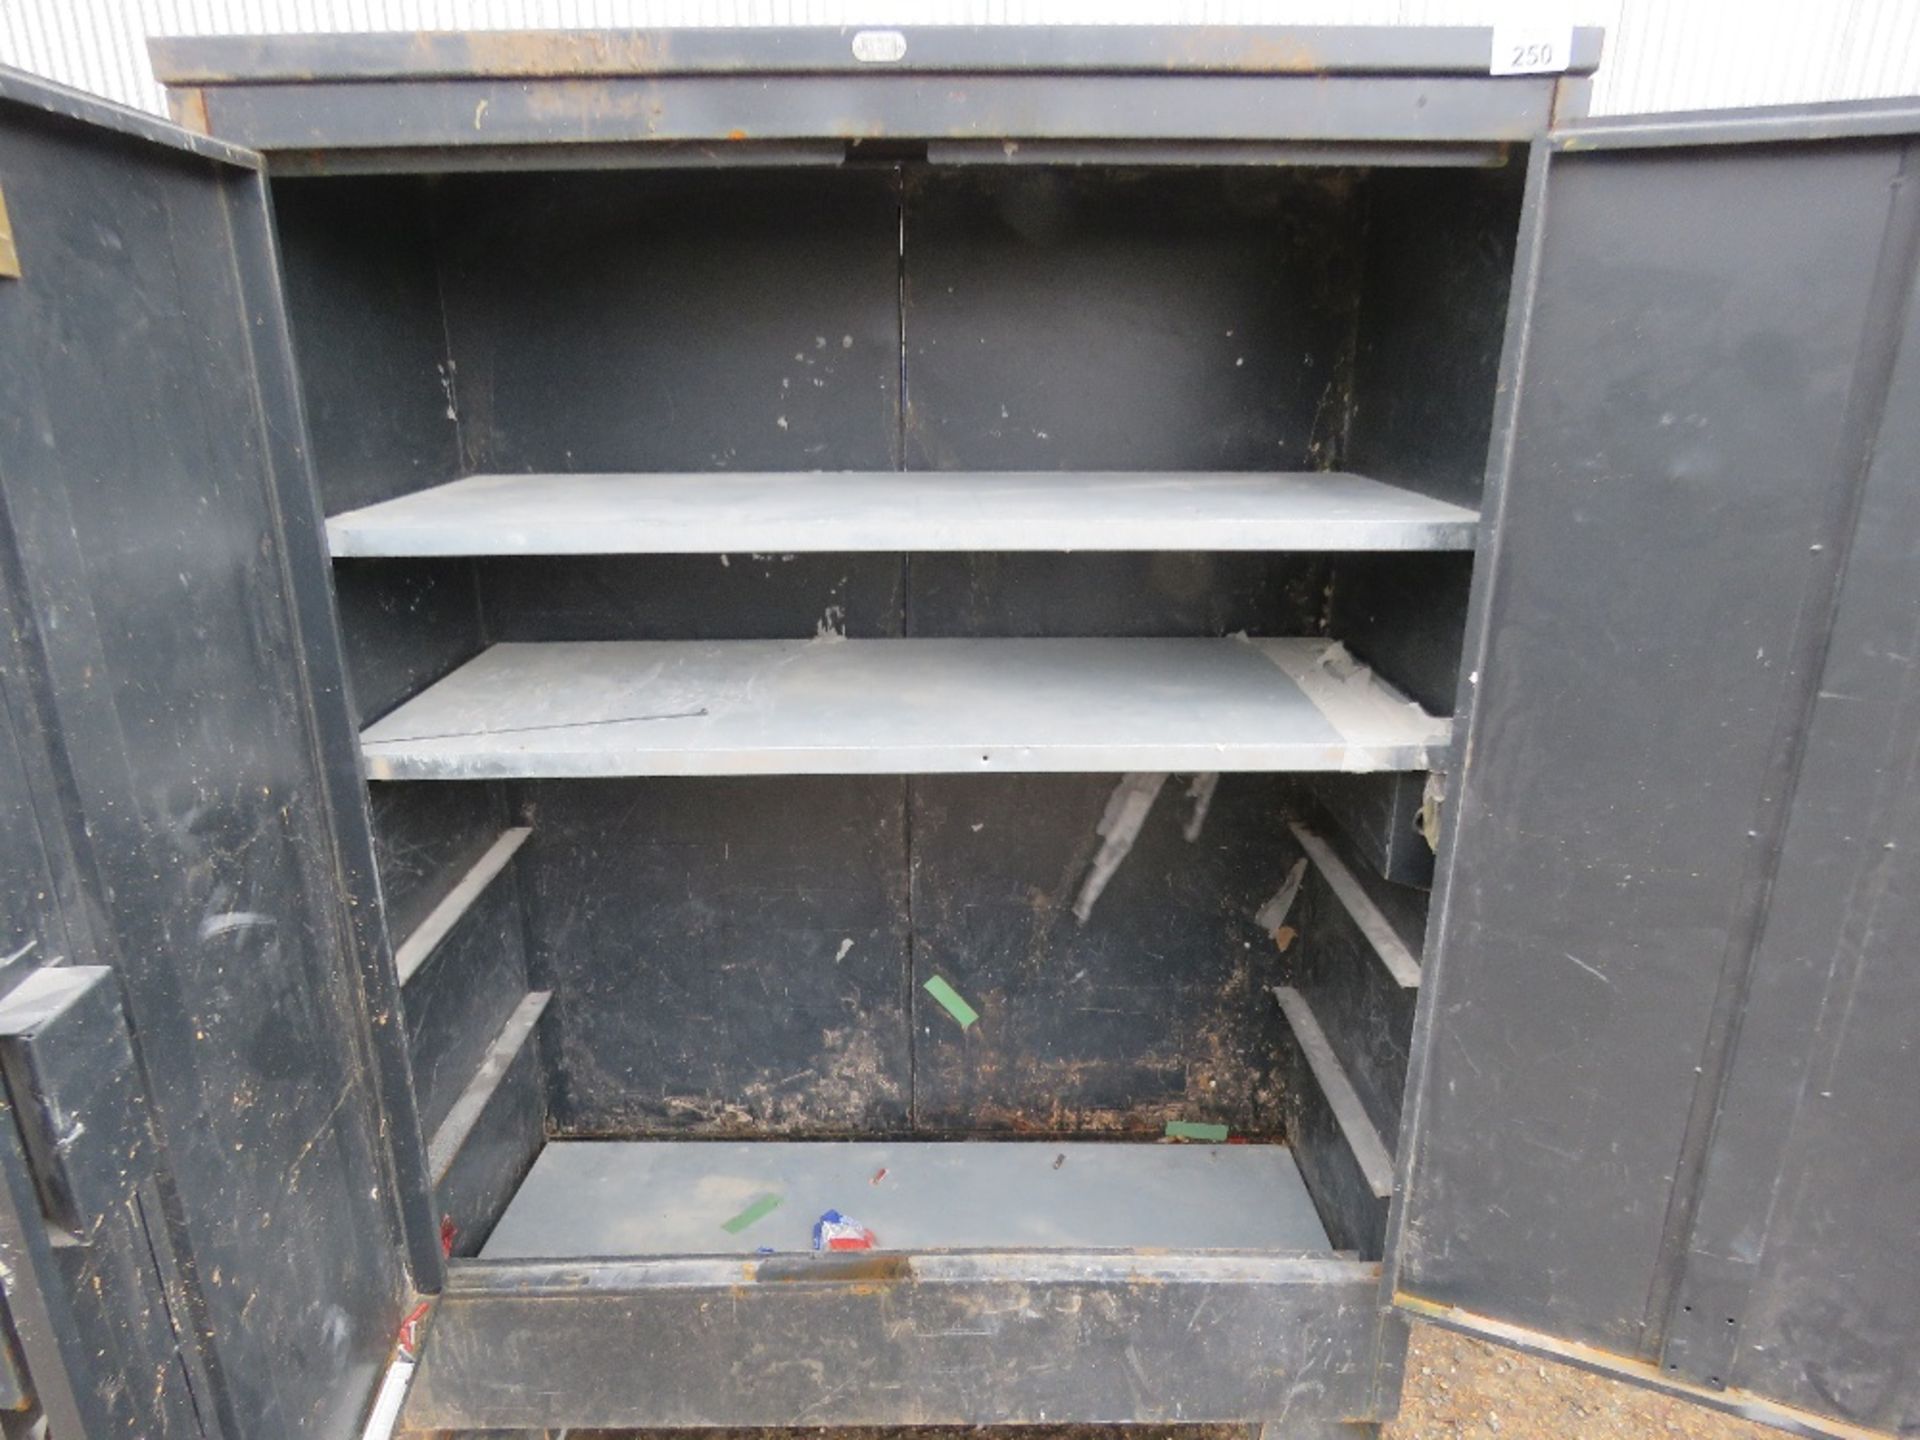 ARMORGARD FITTINGSTOR CABINET, UNLOCKED, NO KEYS. SOURCED FROM COMPANY LIQUIDATION. - Image 2 of 2